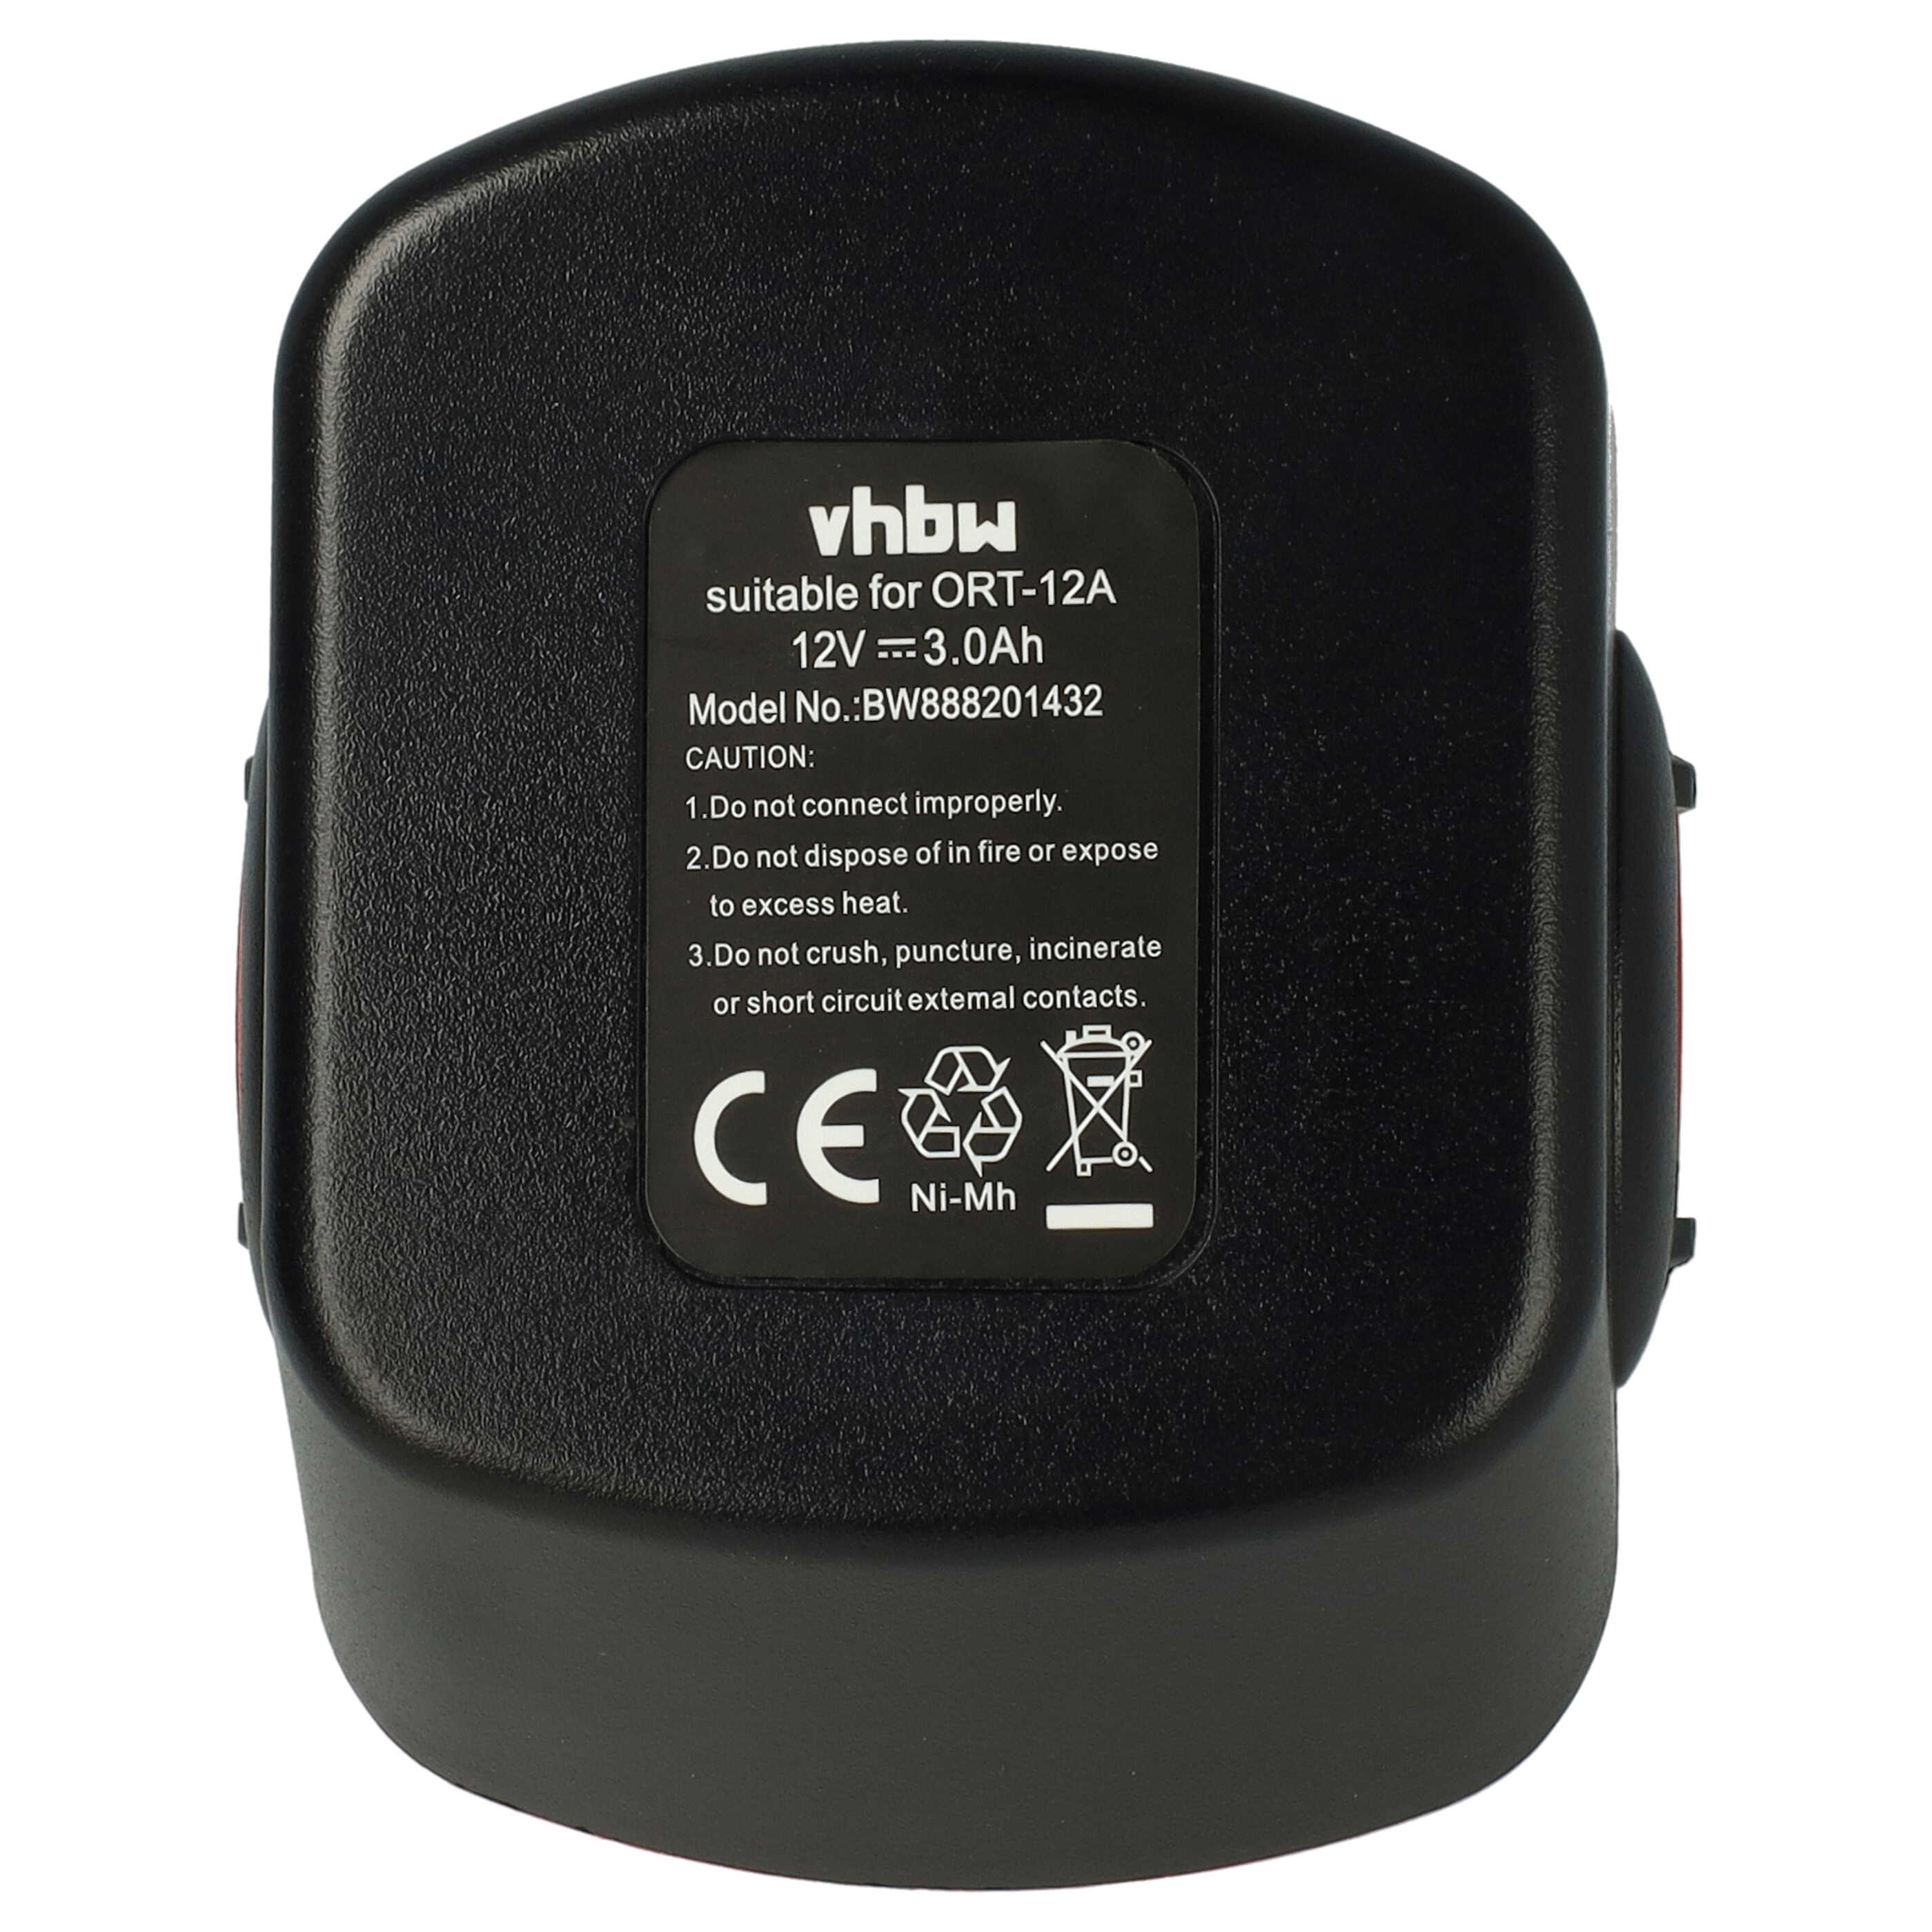 Electric Power Tool Battery Replaces Bosch 2 607 335 261, 2 607 335 262, 2 60 7335 249 - 3000 mAh, 12 V, NiMH